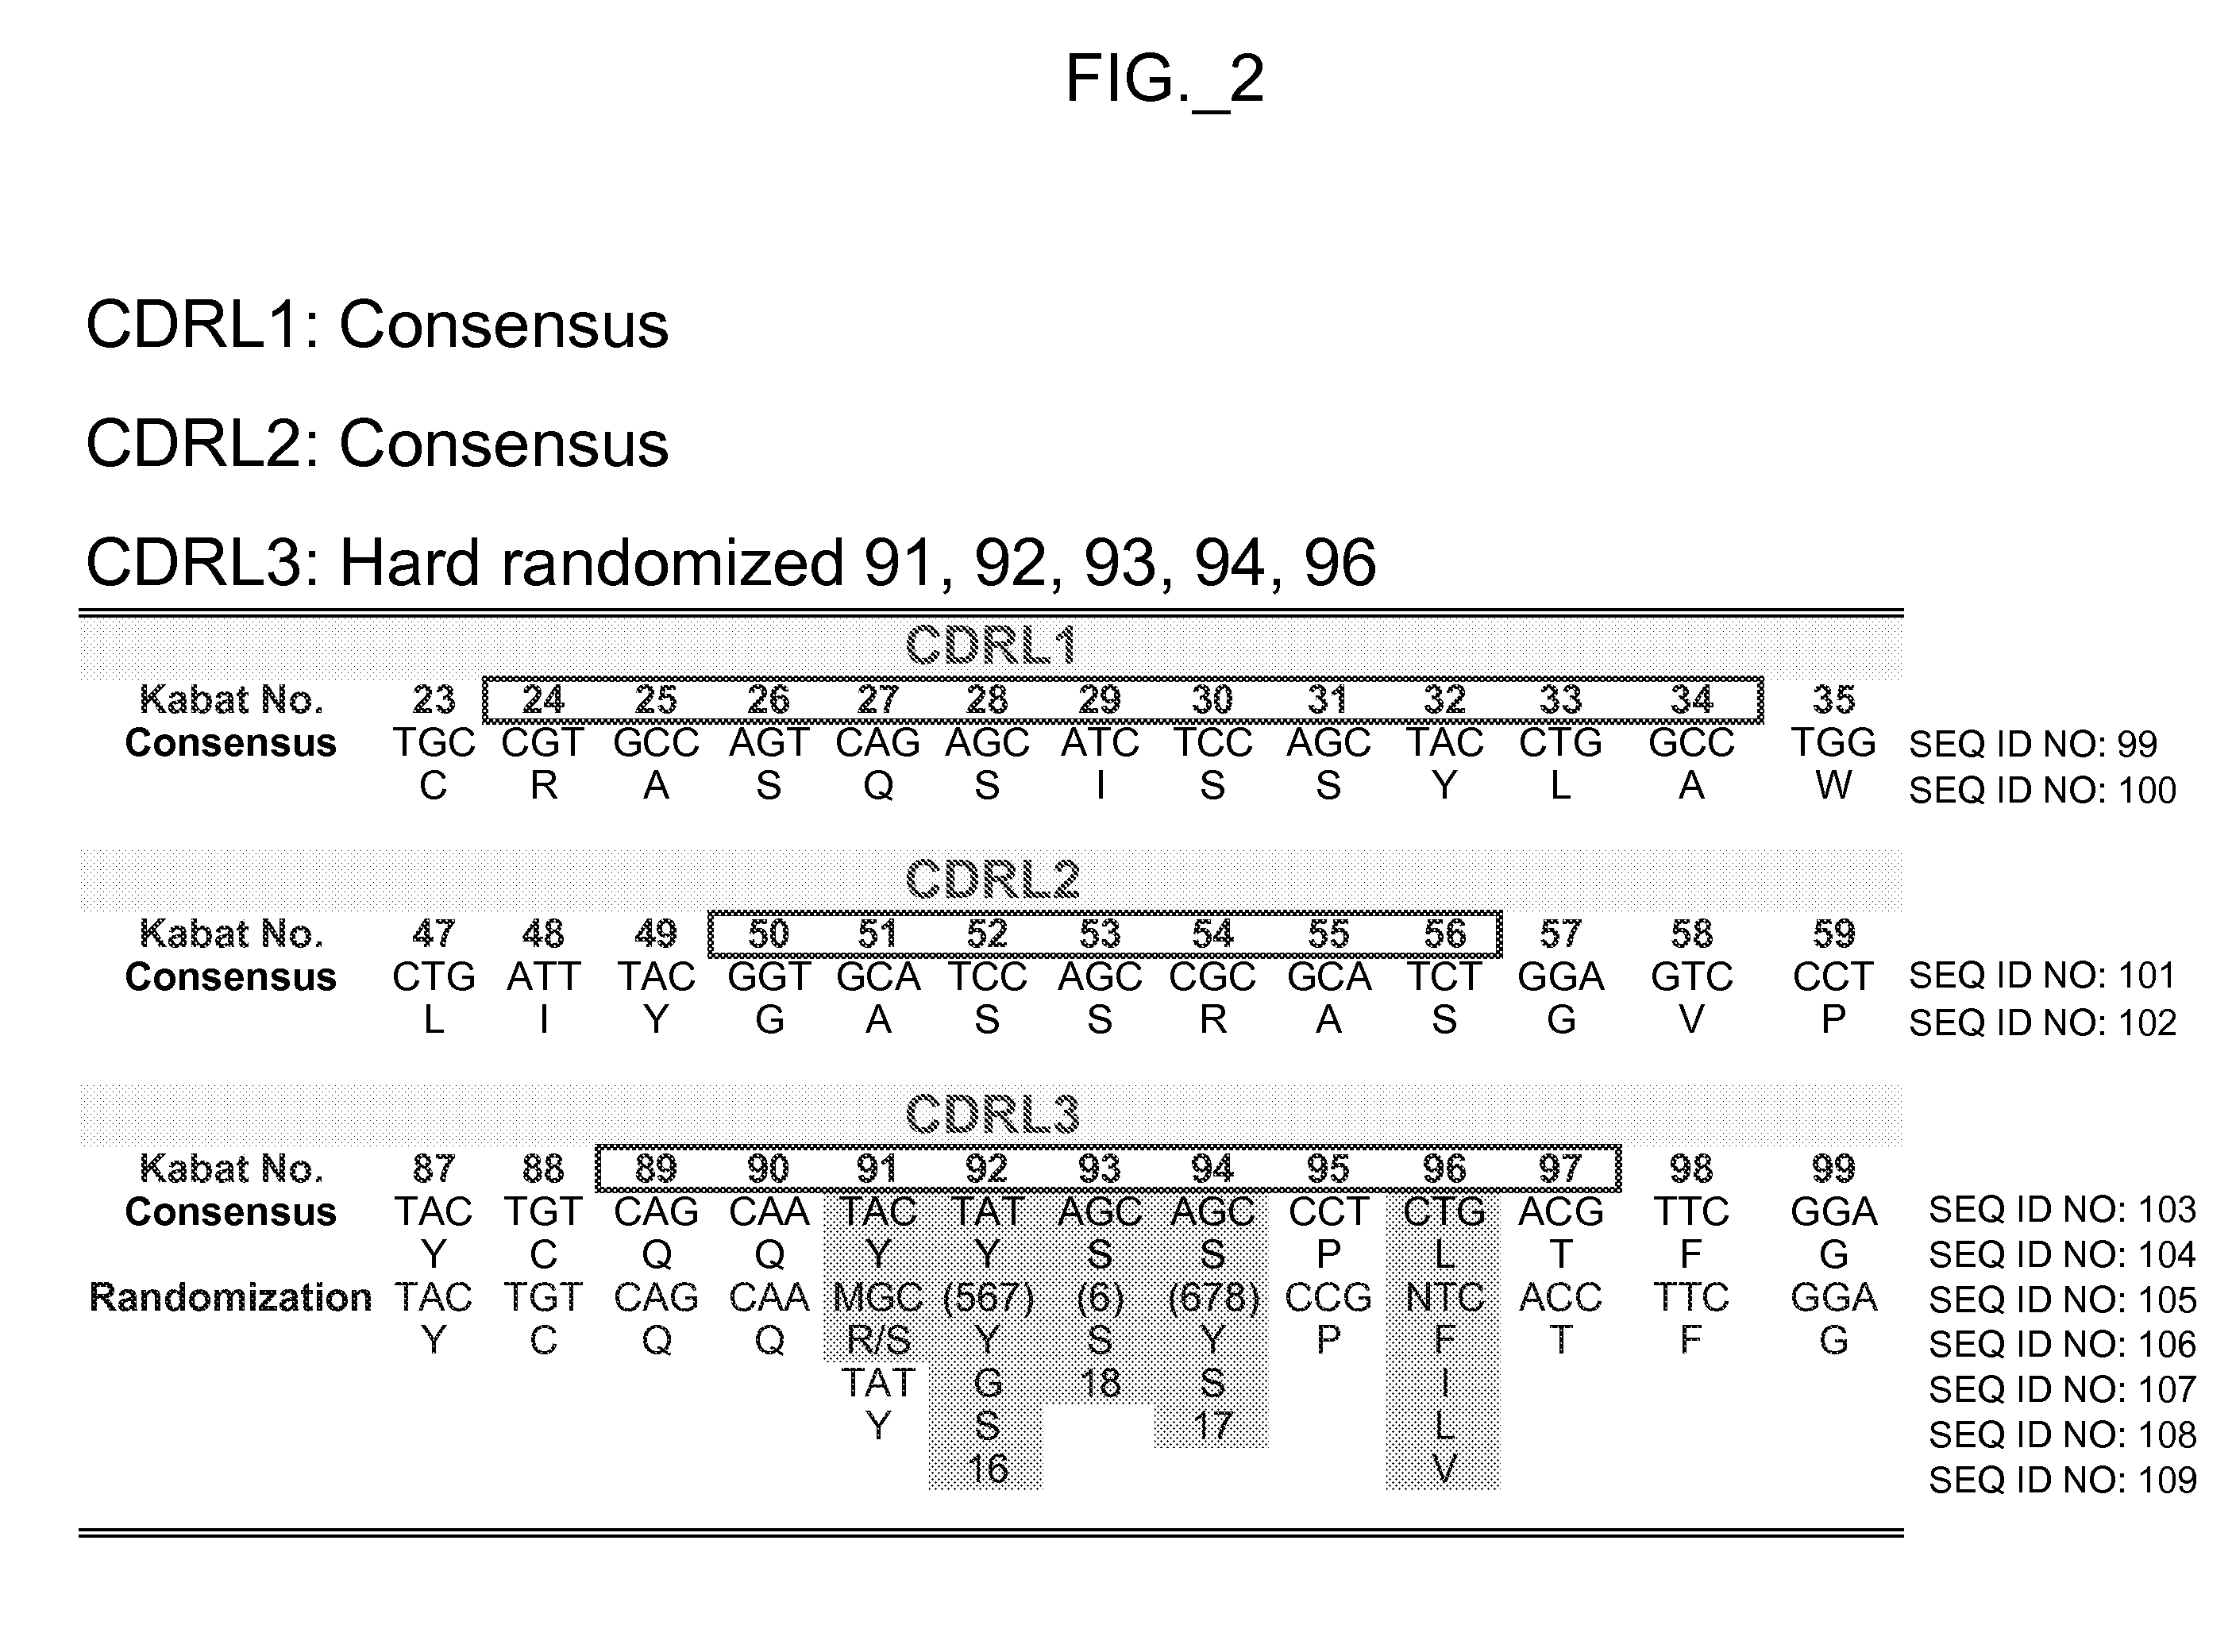 Binding polypeptides with diversified and consensus vh/vl hypervariable sequences